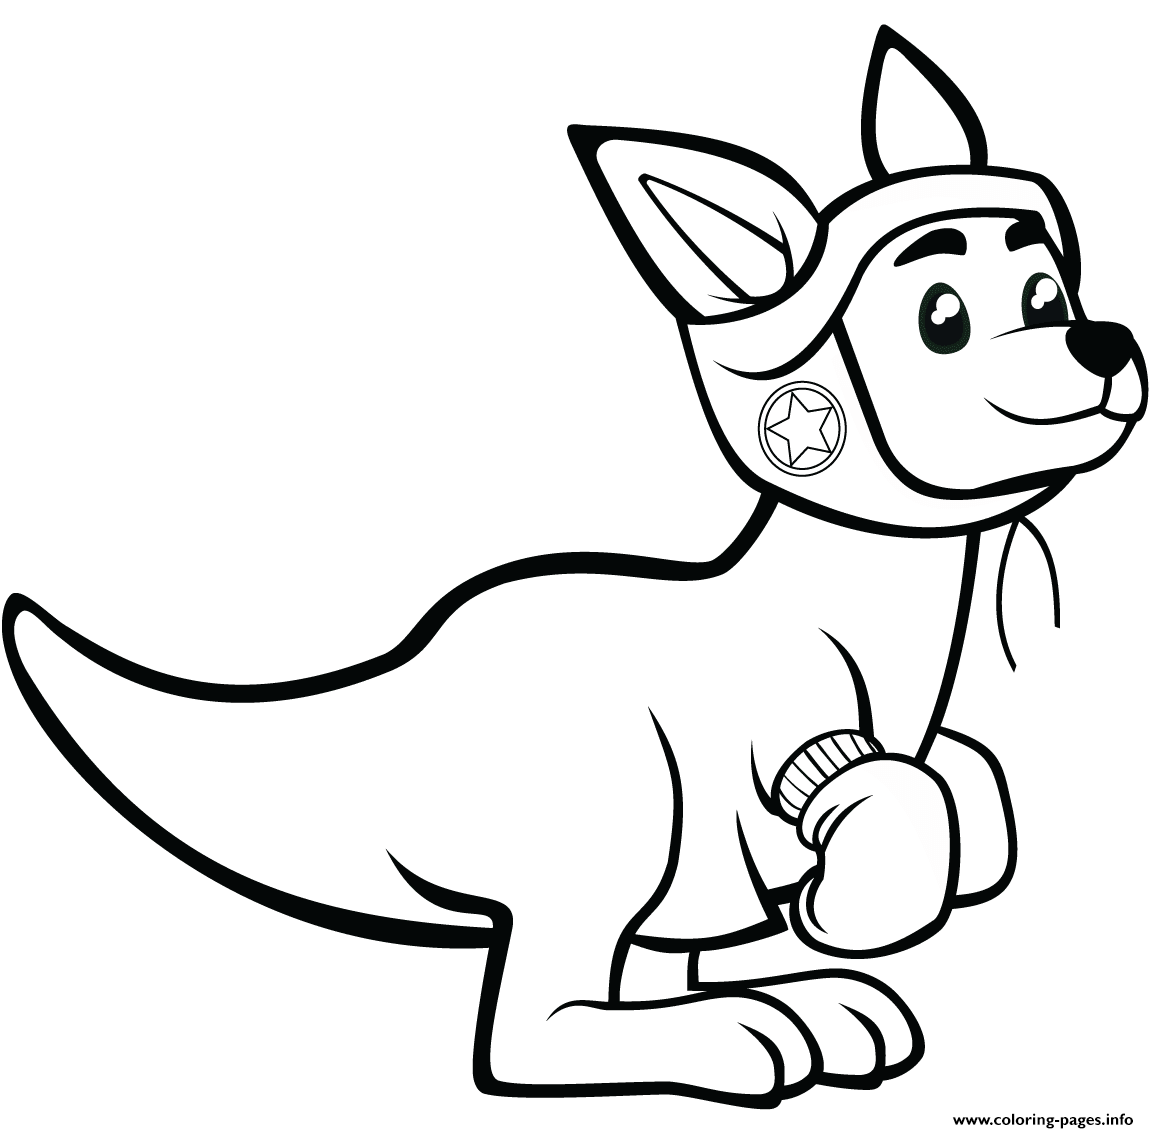 Cartoon Kangaroo With Boxing Gloves Coloring Pages Printable